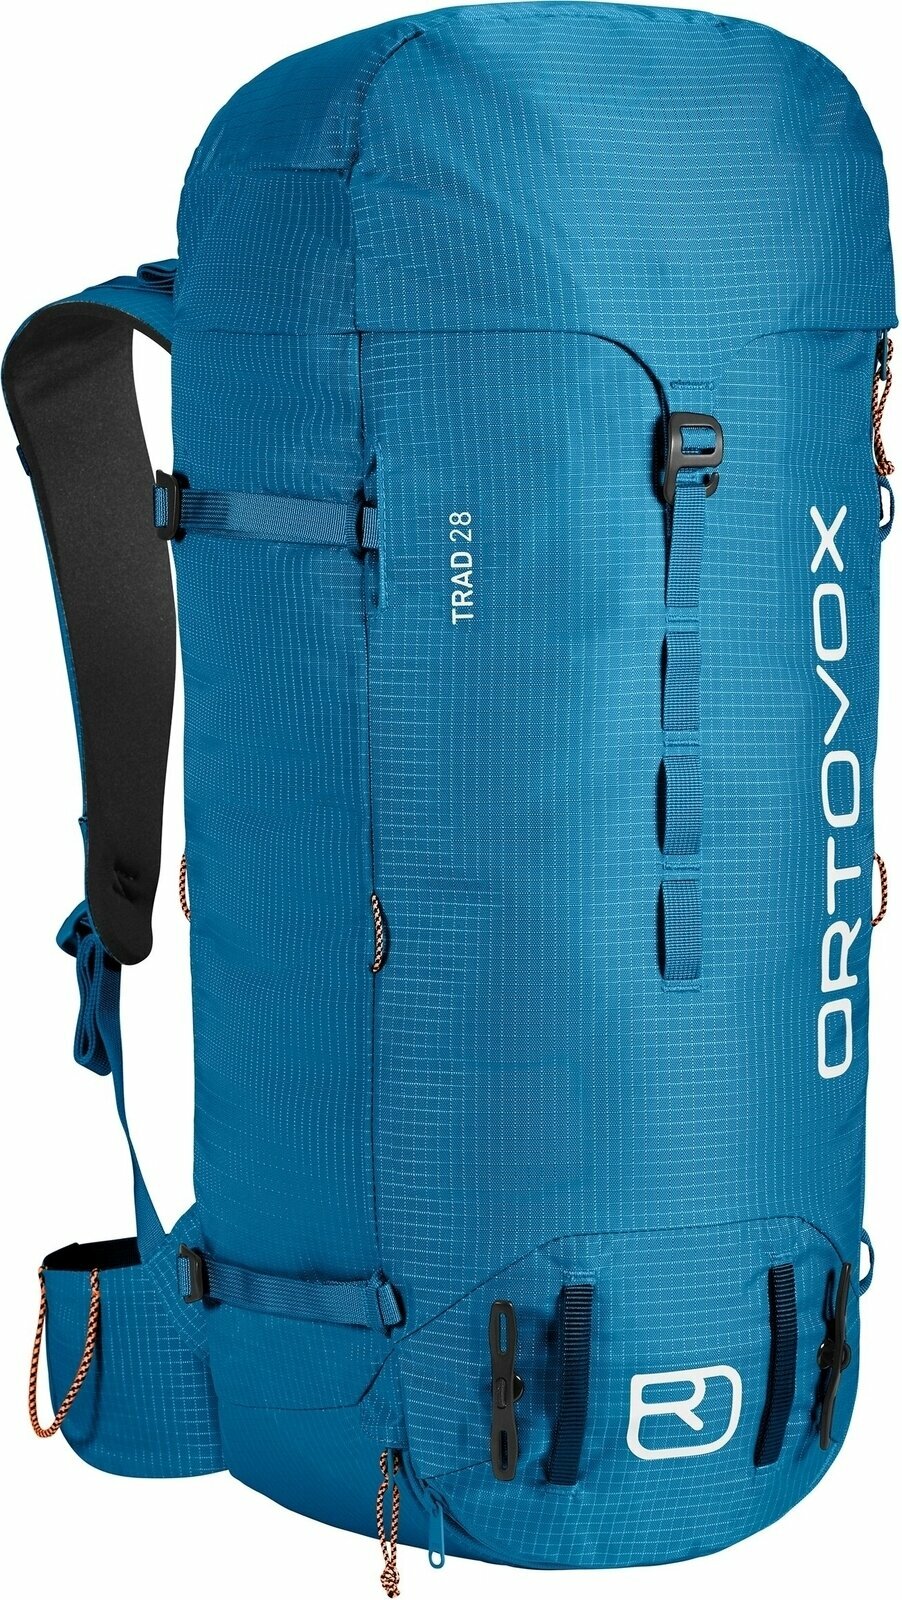 Outdoor Backpack Ortovox Trad 28 Heritage Blue Outdoor Backpack